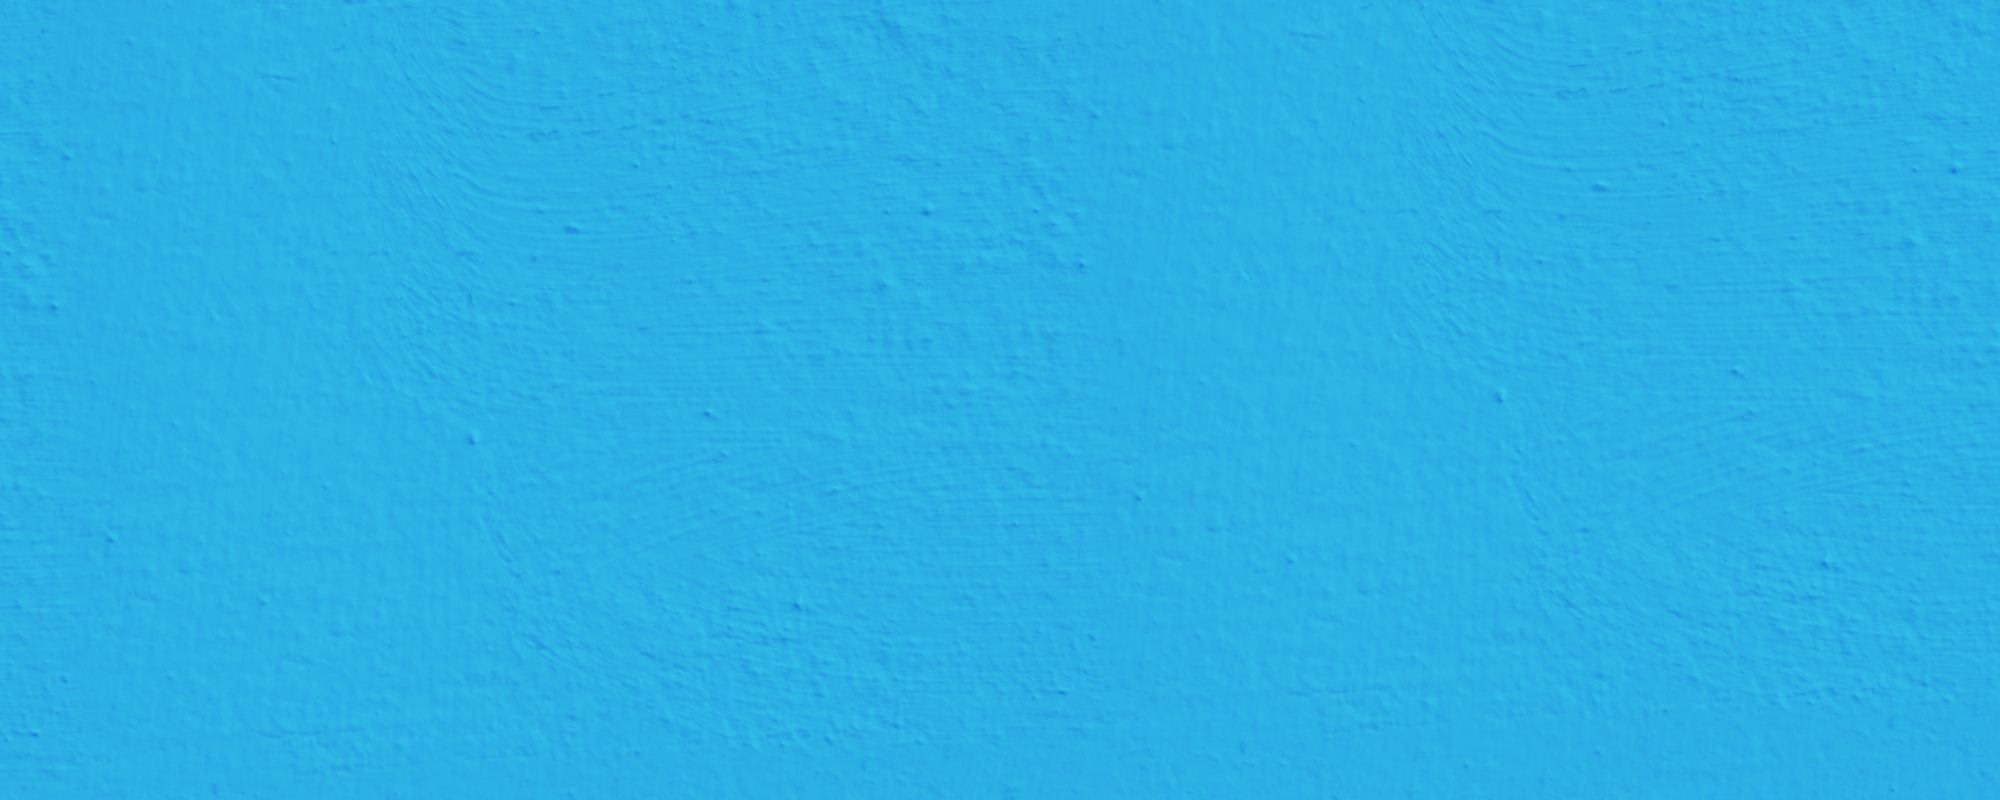 Blue turquoise Emulsion wall paint texture rectangle background